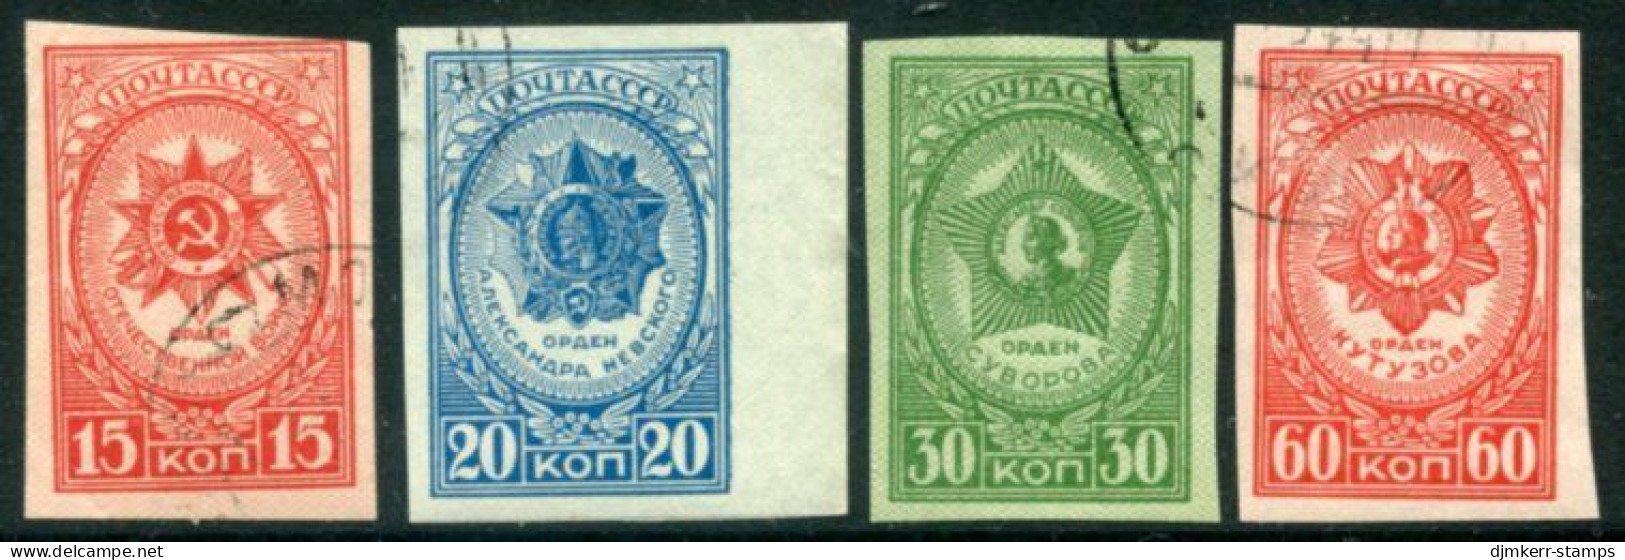 SOVIET UNION 1944 Orders And Medals Imperforate Used.  Michel 901-04B - Used Stamps